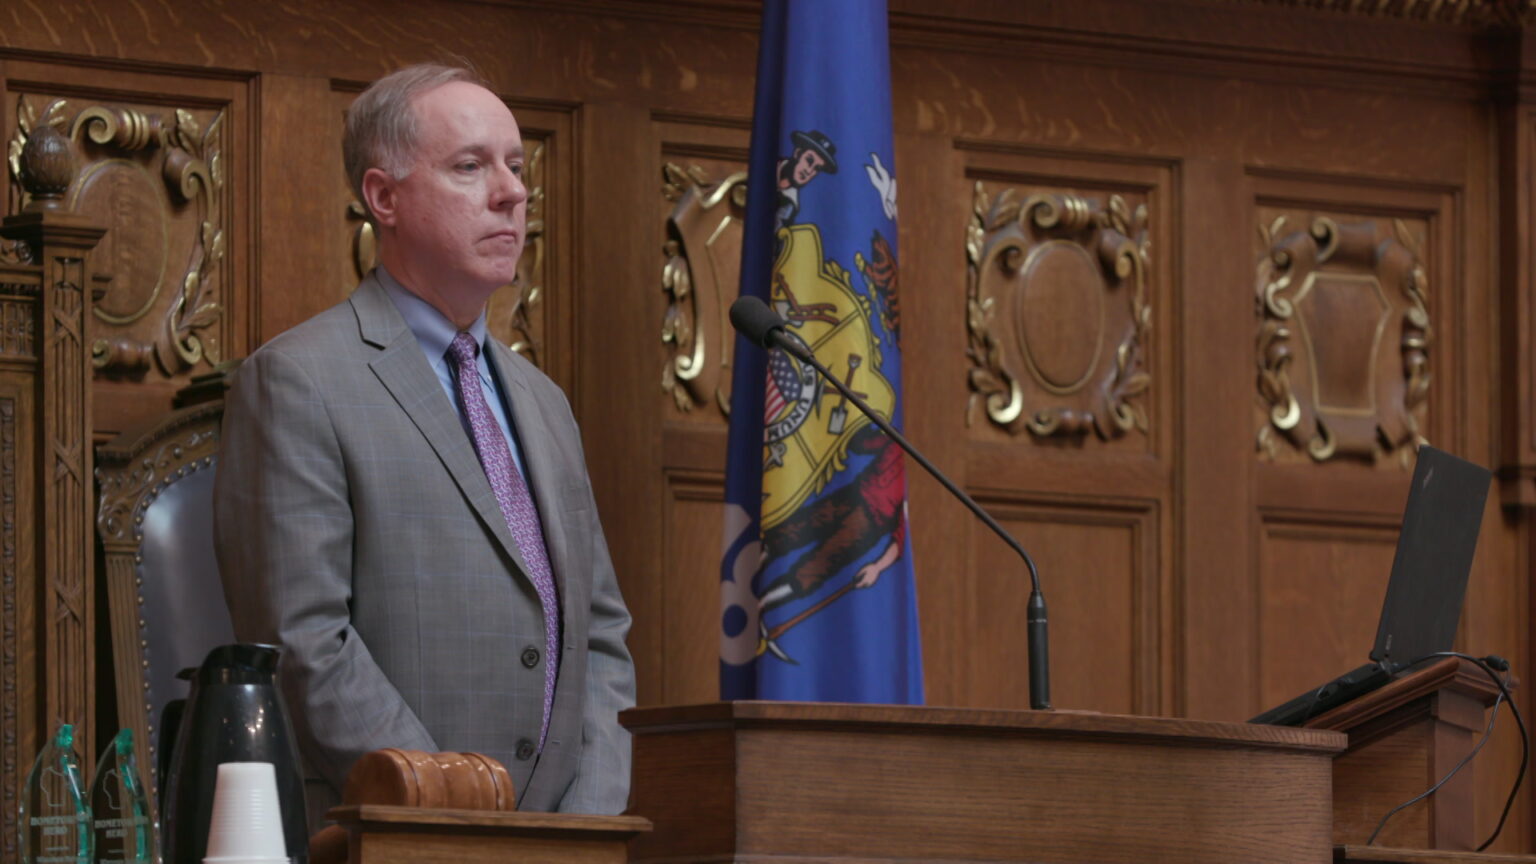 Robin Vos stands from the Speaker's chairs on the dais at the front of the Wisconsin Assembly chamber, with a Wisconsin flag and wood-paneled walls in the background.